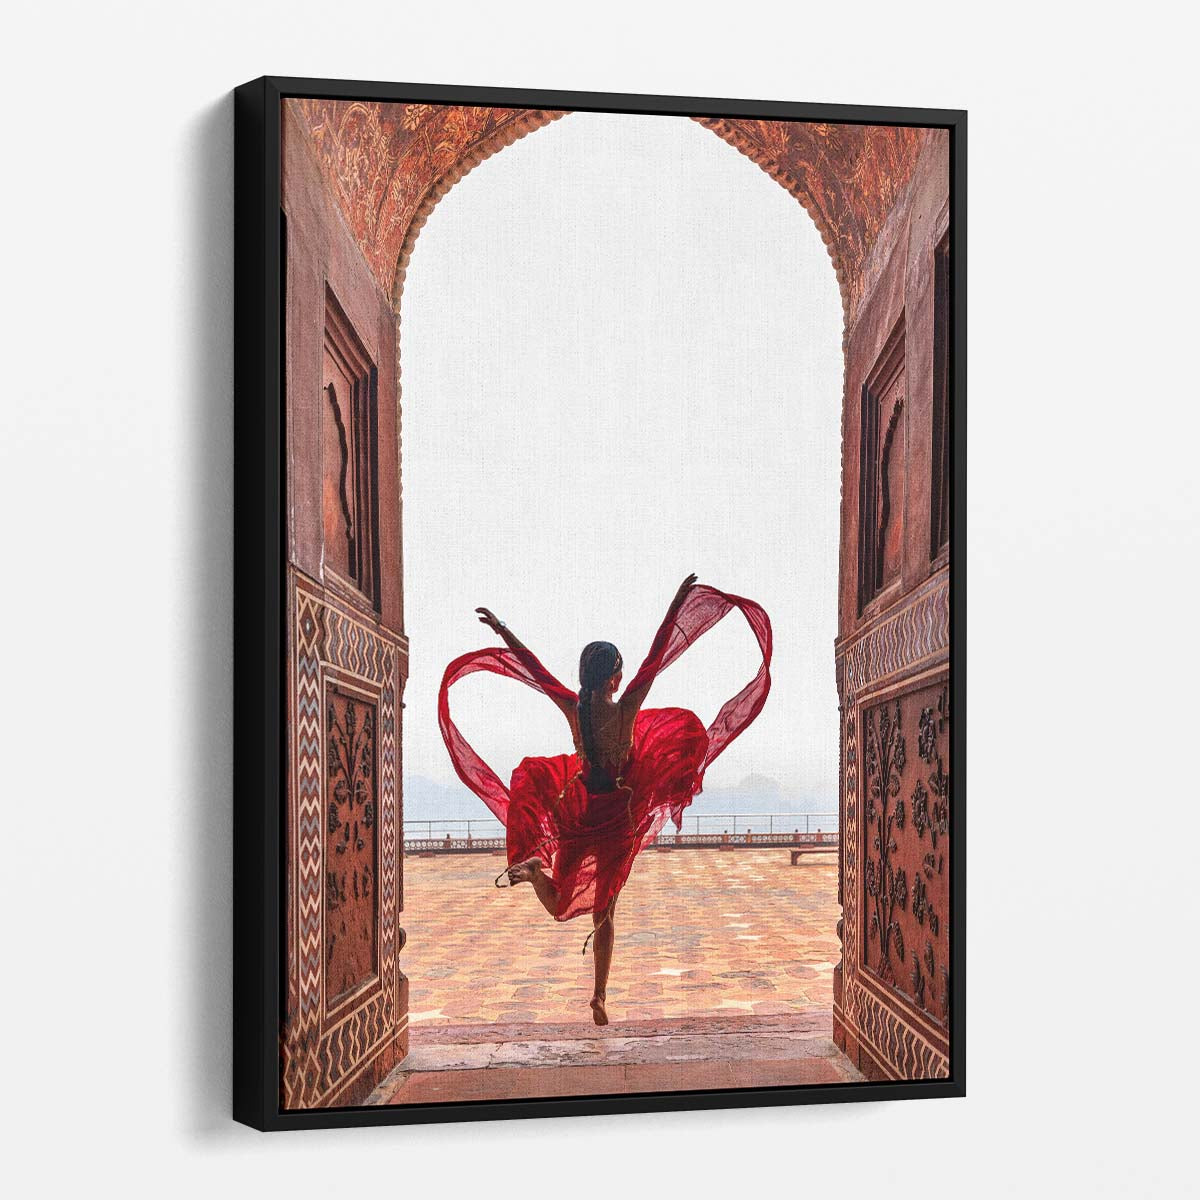 Romantic Leap at Taj Mahal Creative Photography of Couple in Red by Luxuriance Designs, made in USA